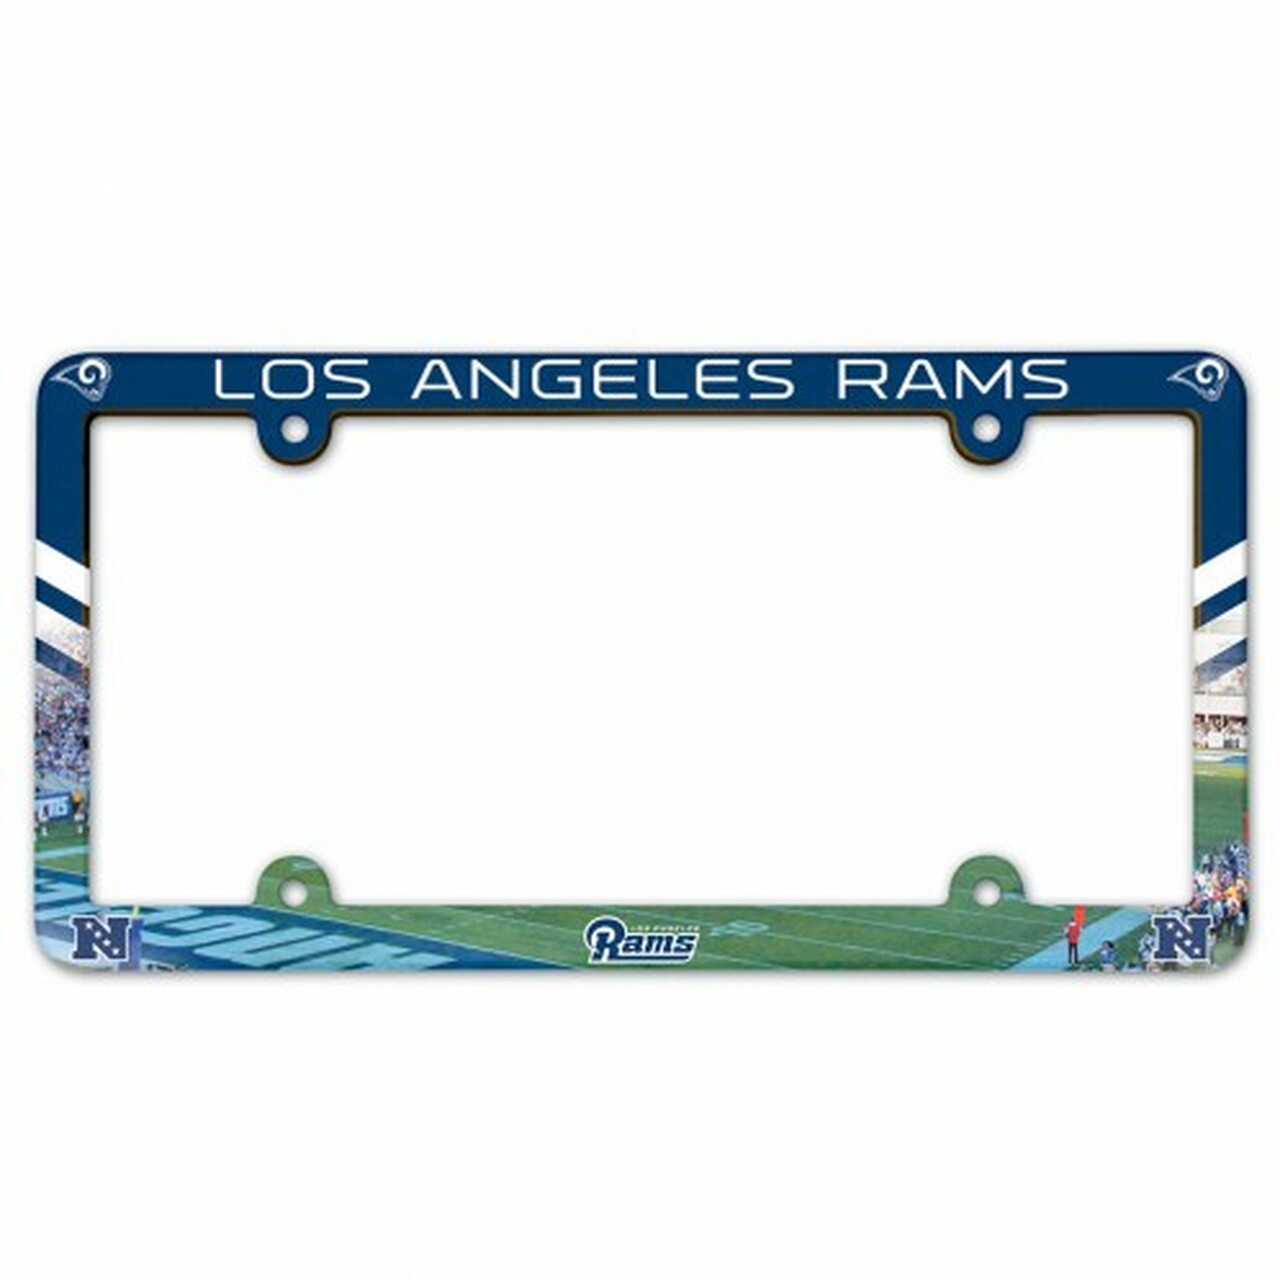 Los Angeles Rams Full Color Plastic License Plate Frame by Wincraft